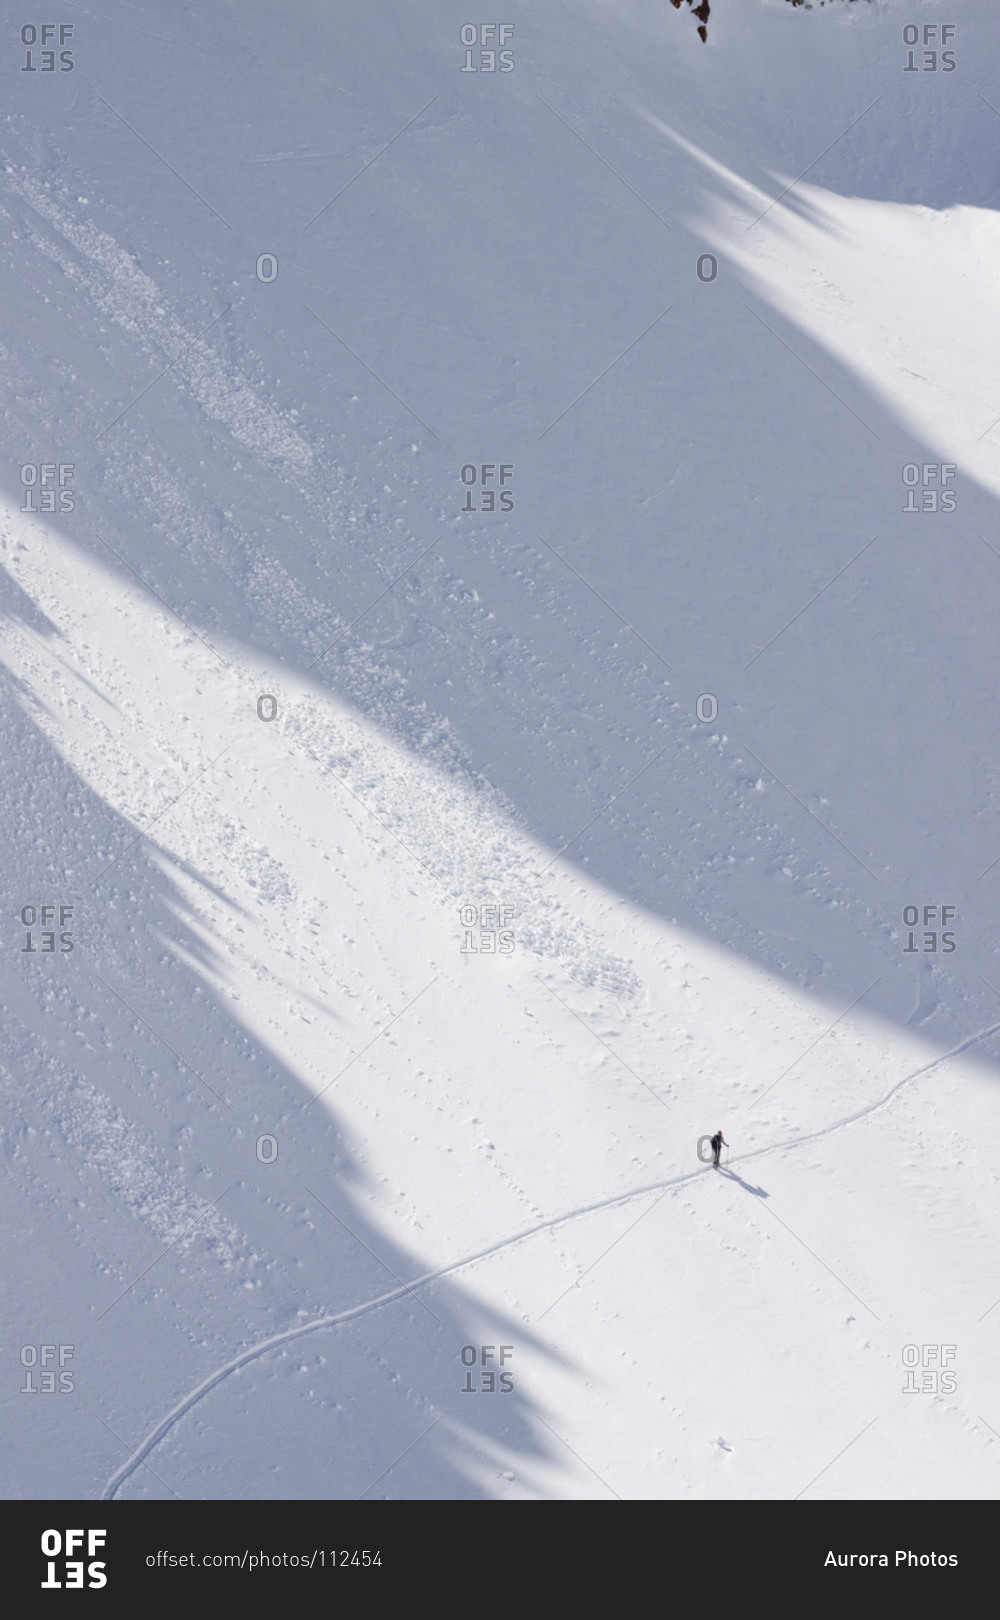 A backcountry skier under the Jesus Christ Couloir on Thompson Peak in the Sawtooth Mountains near Stanley, Idaho